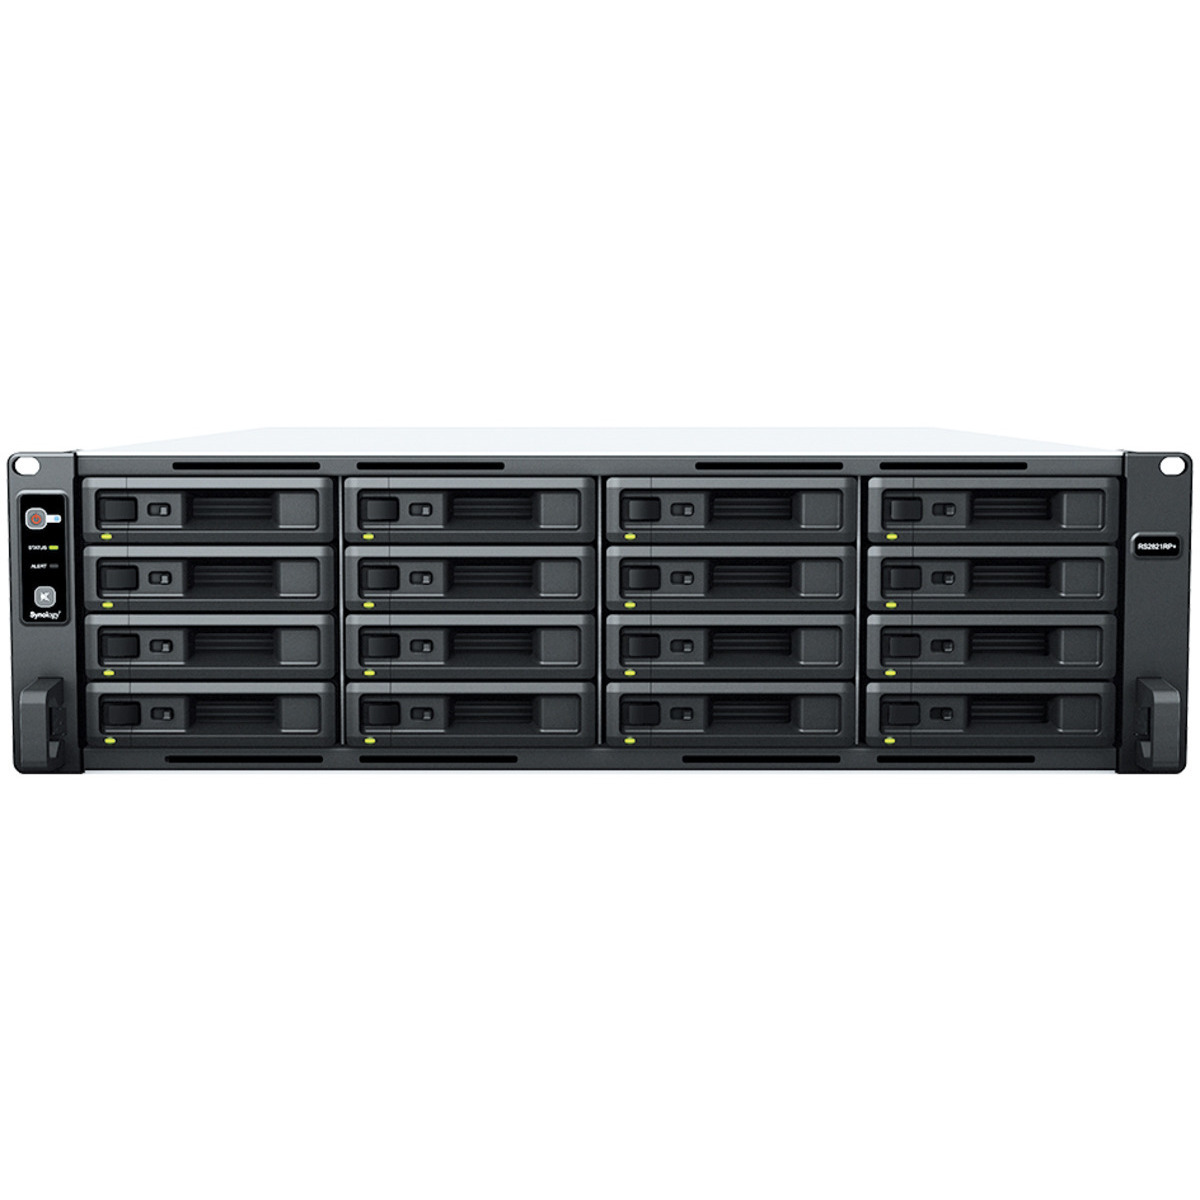 buy Synology RackStation RS2821RP+ RackMount NAS - Network Attached Storage Device Burn-In Tested Configurations - nas headquarters buy network attached storage server device das new raid-5 free shipping usa christmas new year holiday sale RackStation RS2821RP+